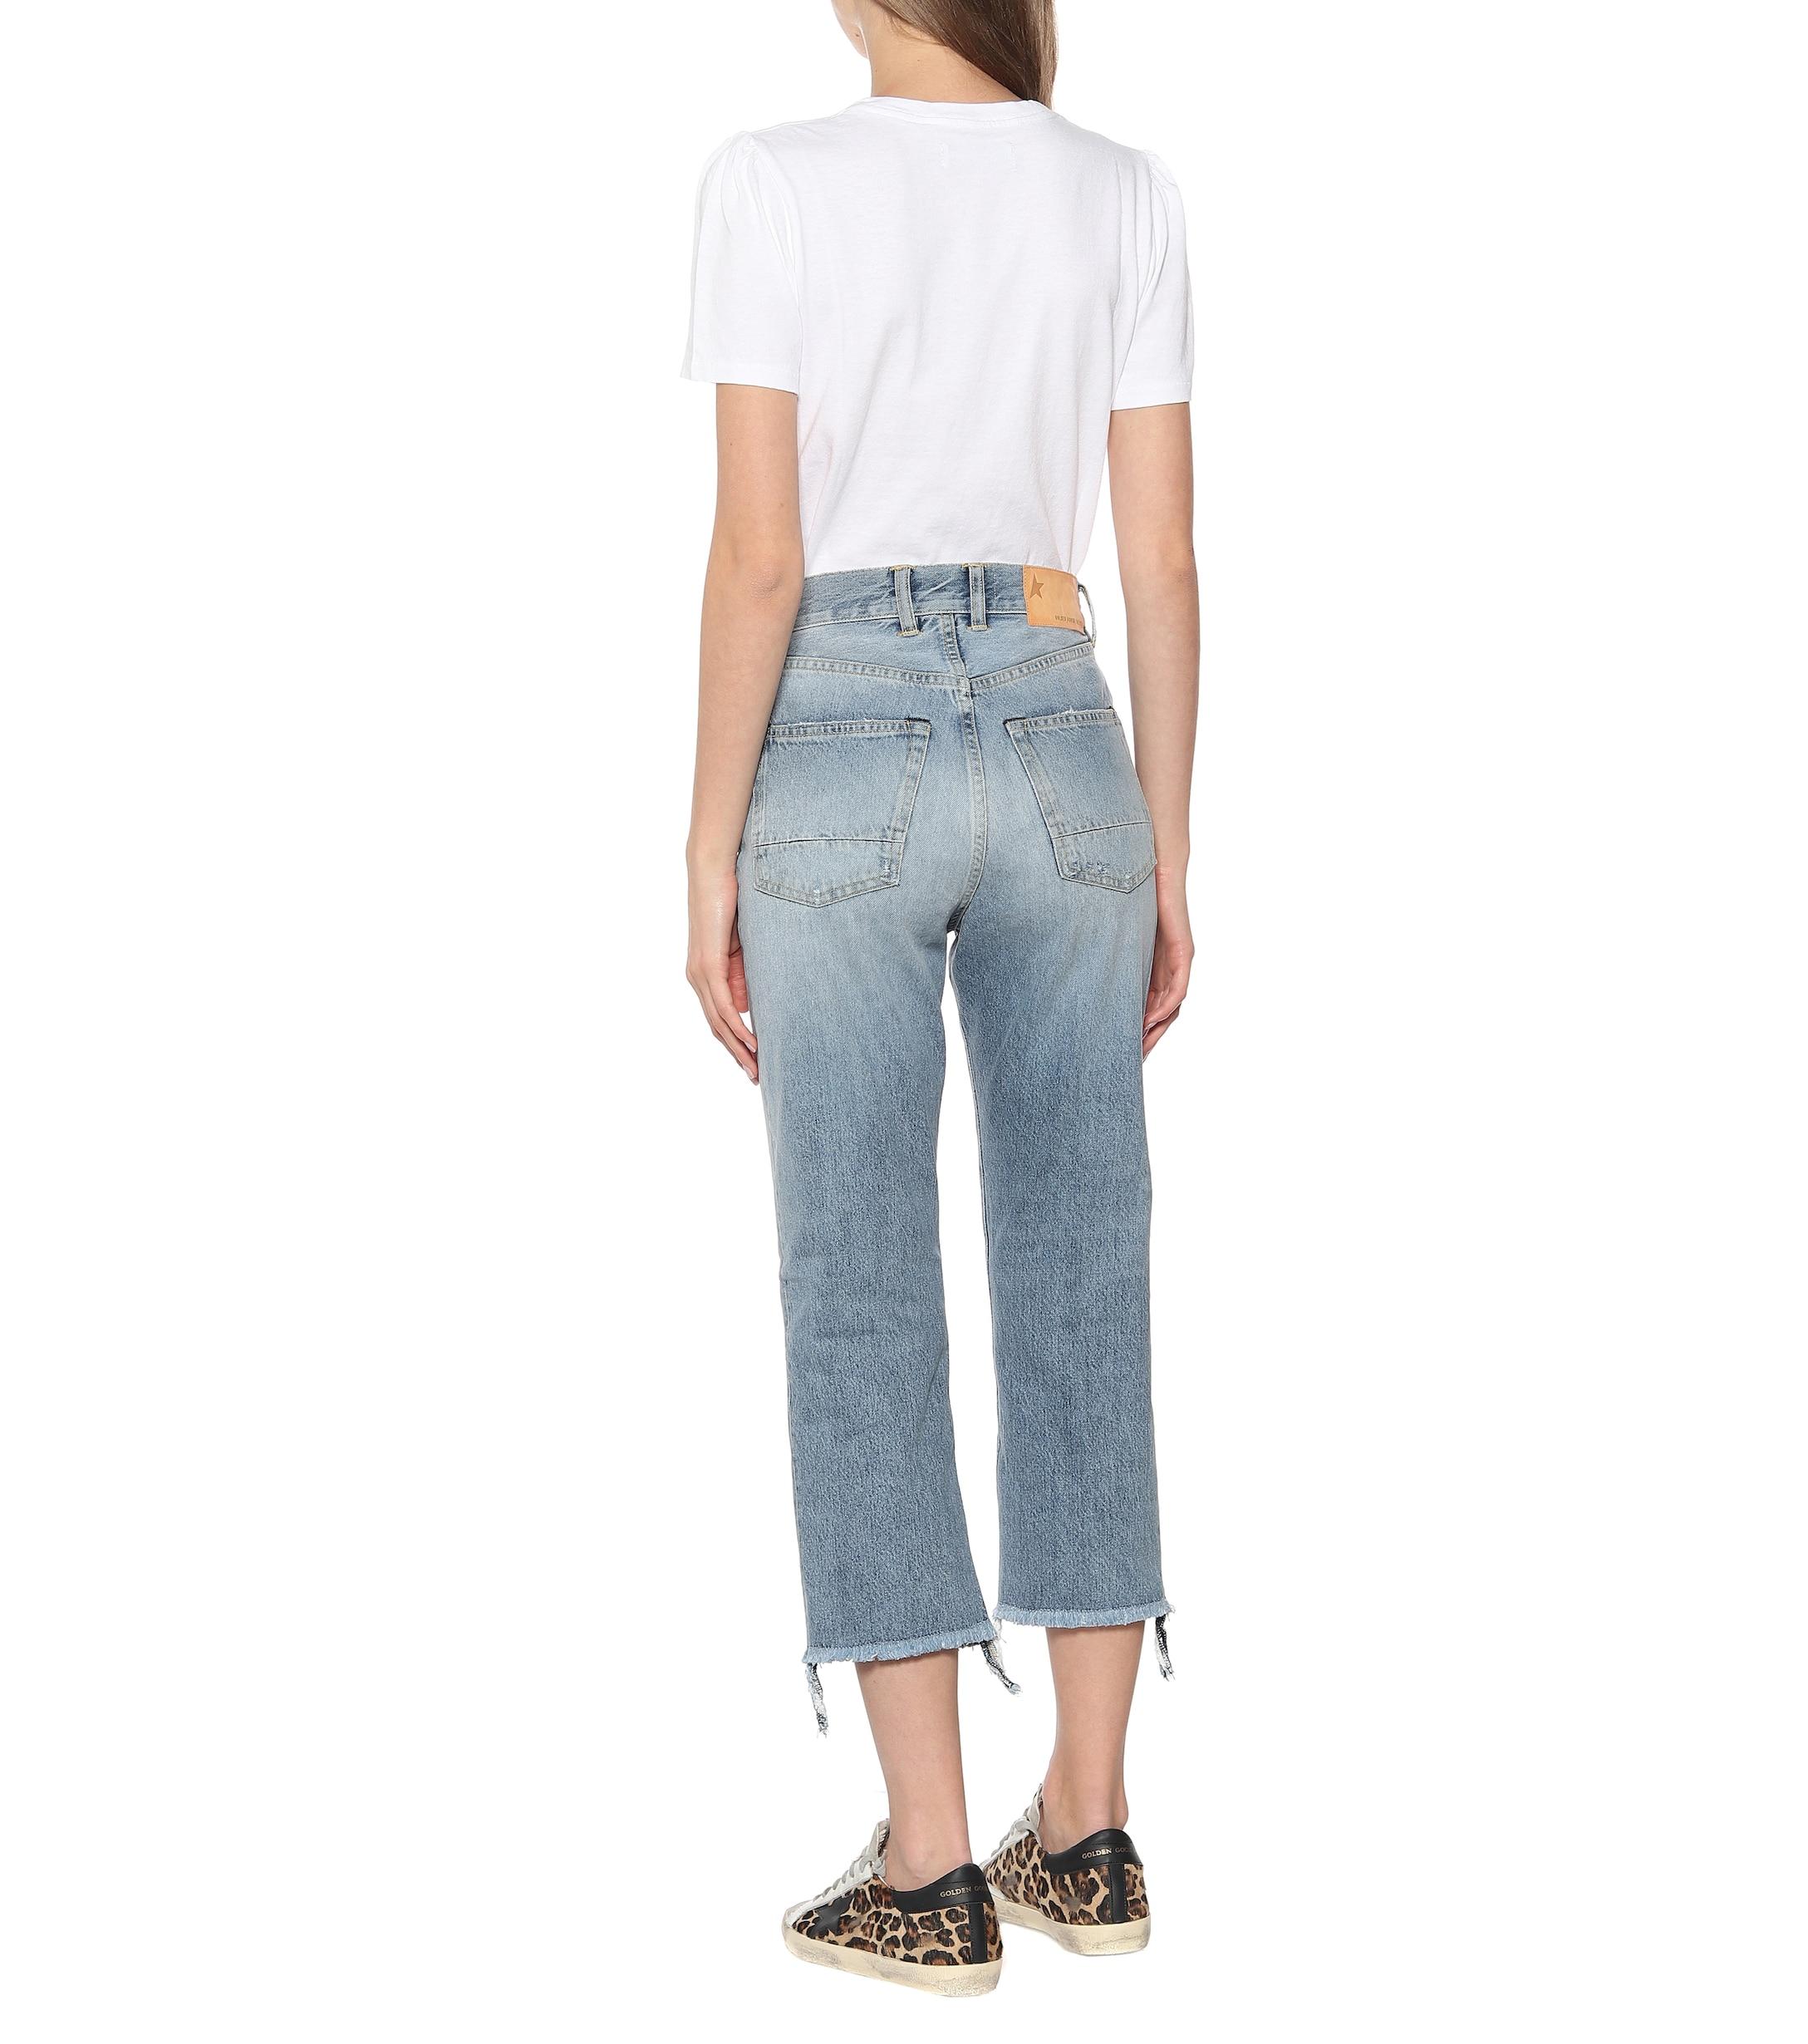 Golden Goose Deluxe Brand Denim Texas Cropped Straight Jeans in Blue - Lyst